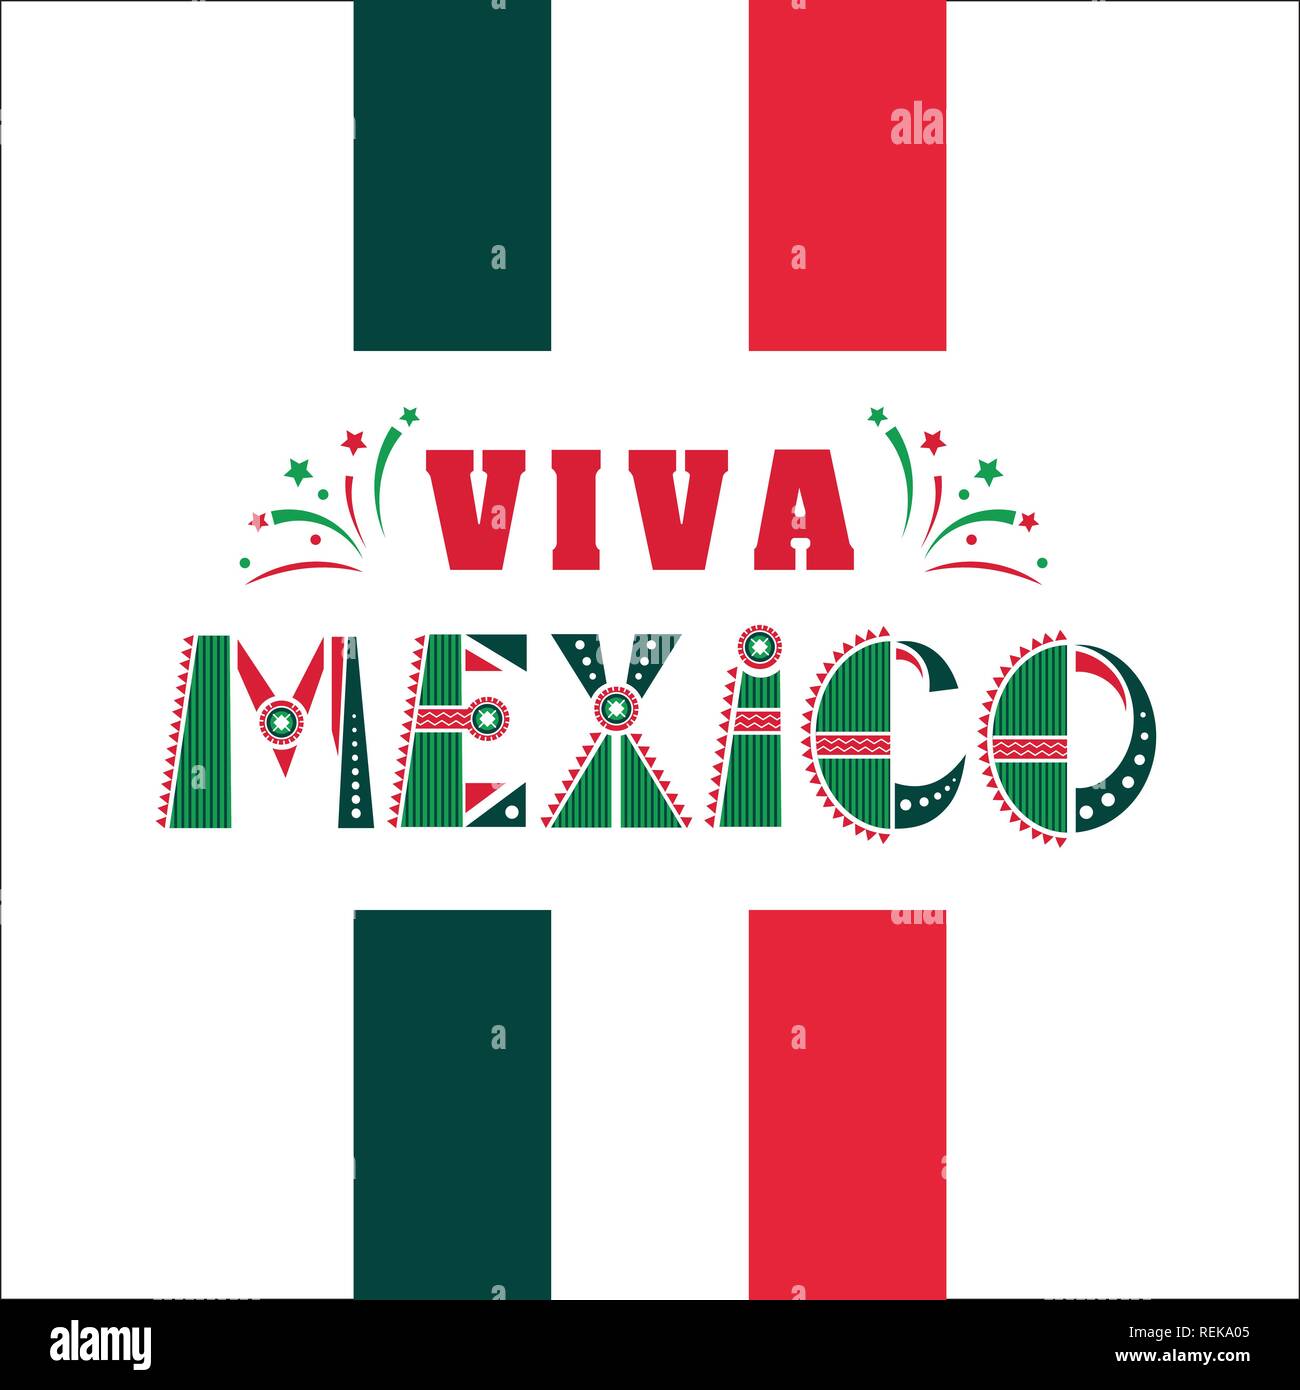 Viva Mexico, national mexican phrase holiday, typography vector illustration in flag colors, ornaments with fireworks. Stock Vector